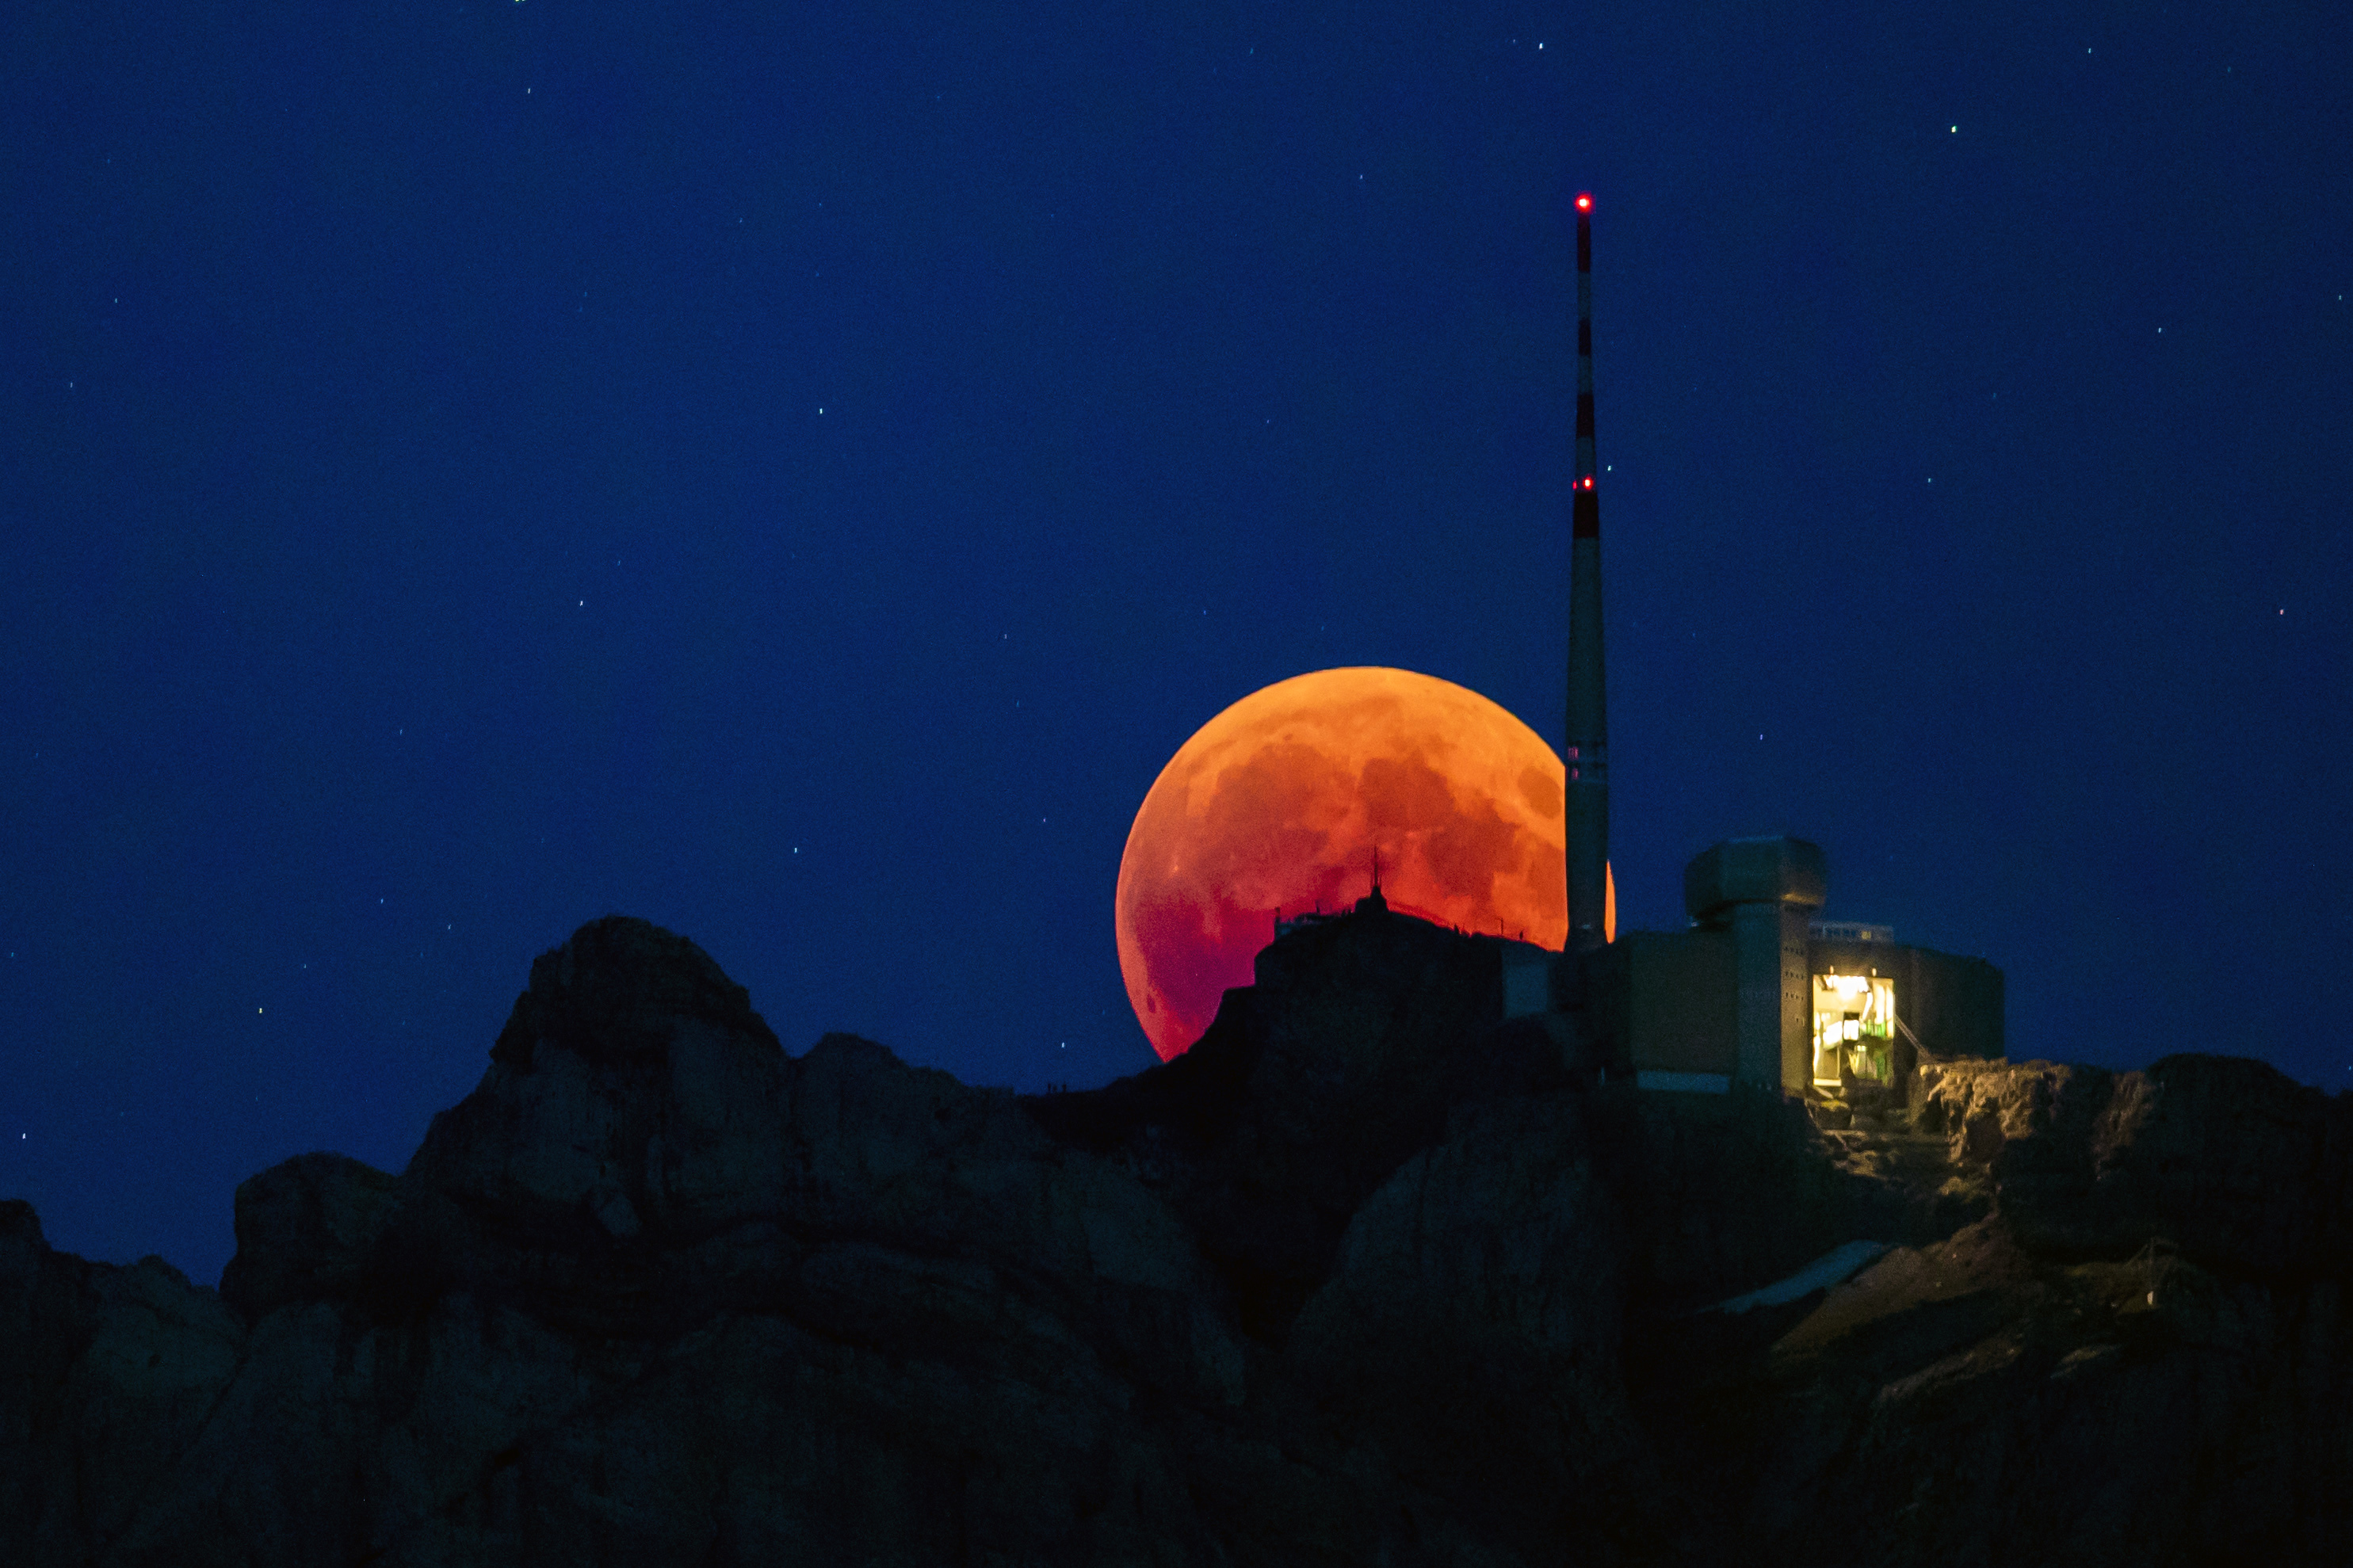 The moon turns red during a total lunar eclipse in Switzerland